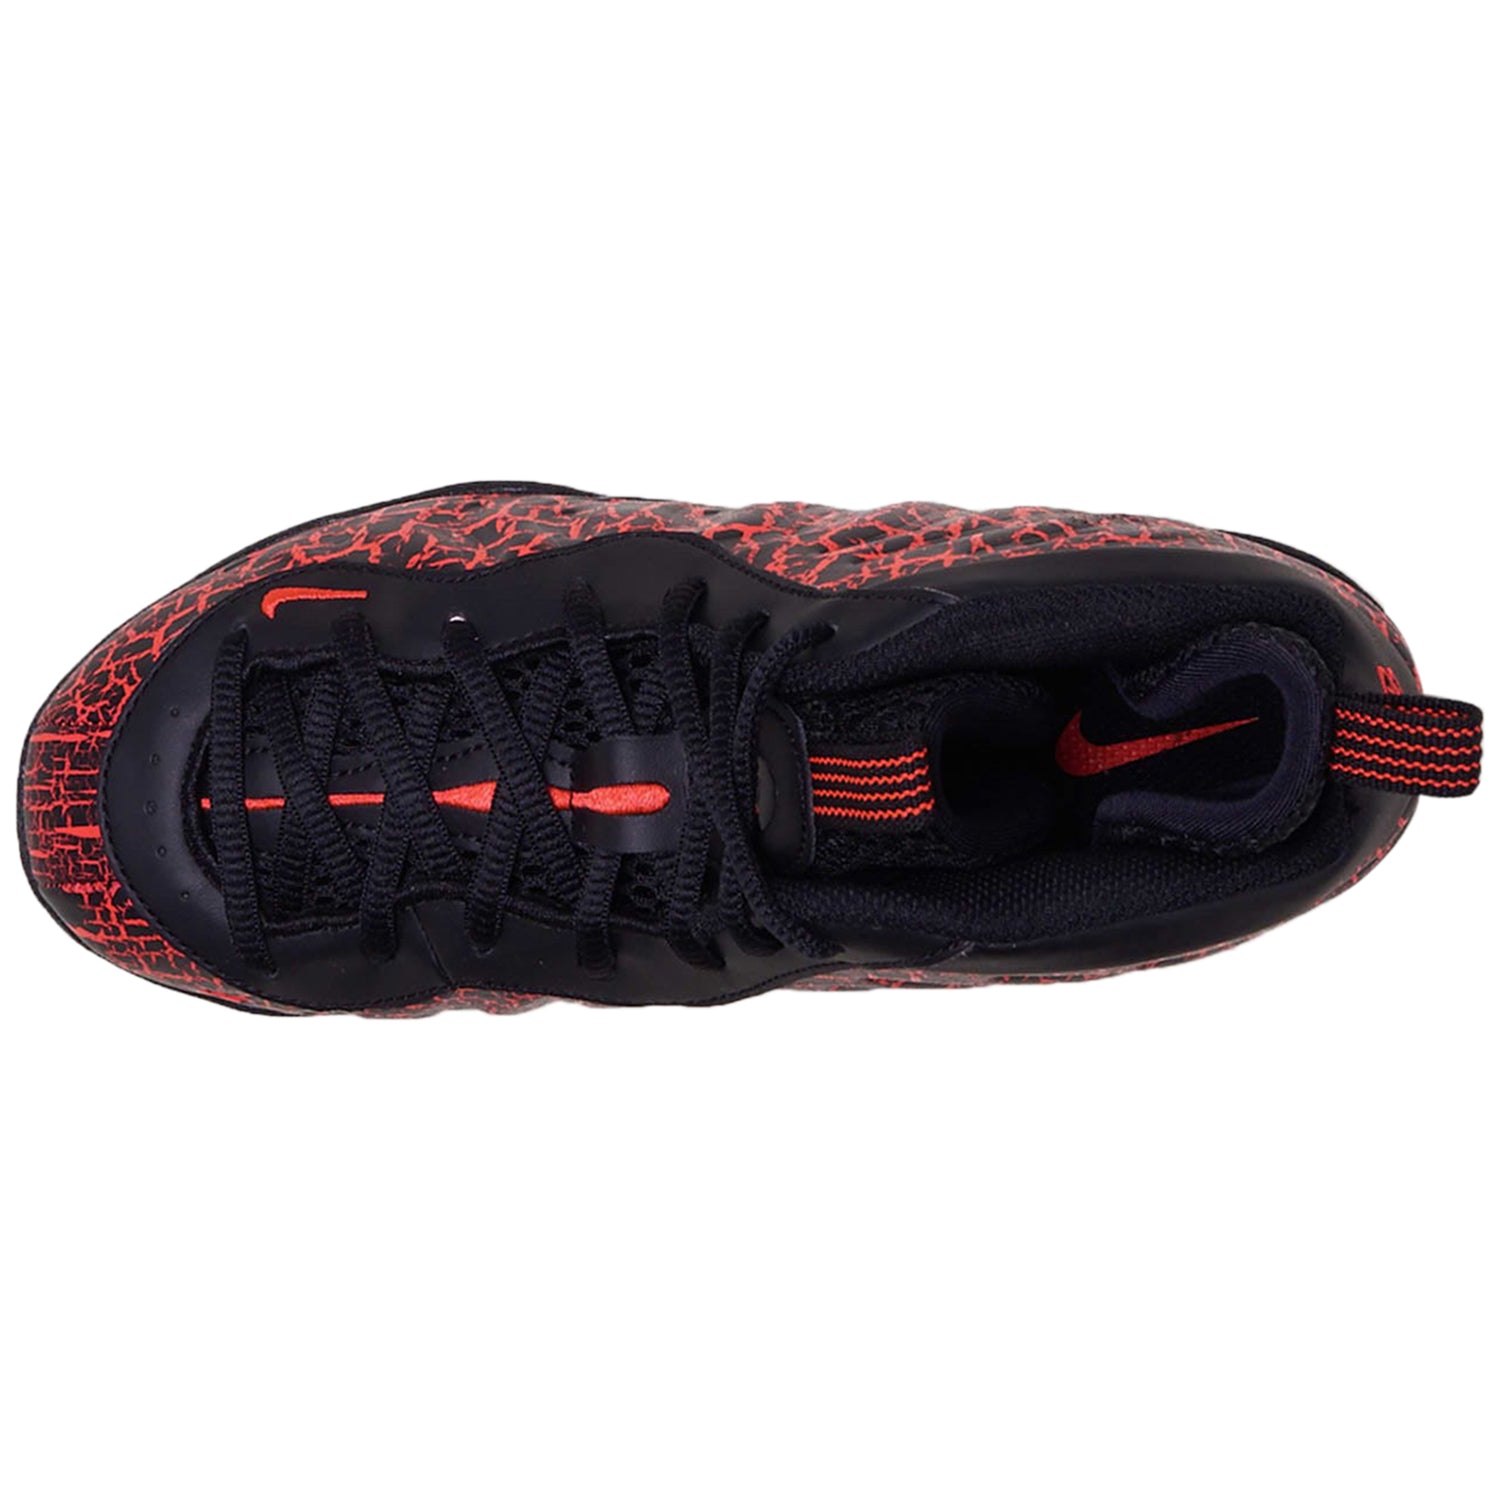 Nike Air Foamposite One Cracked Lava (PS)